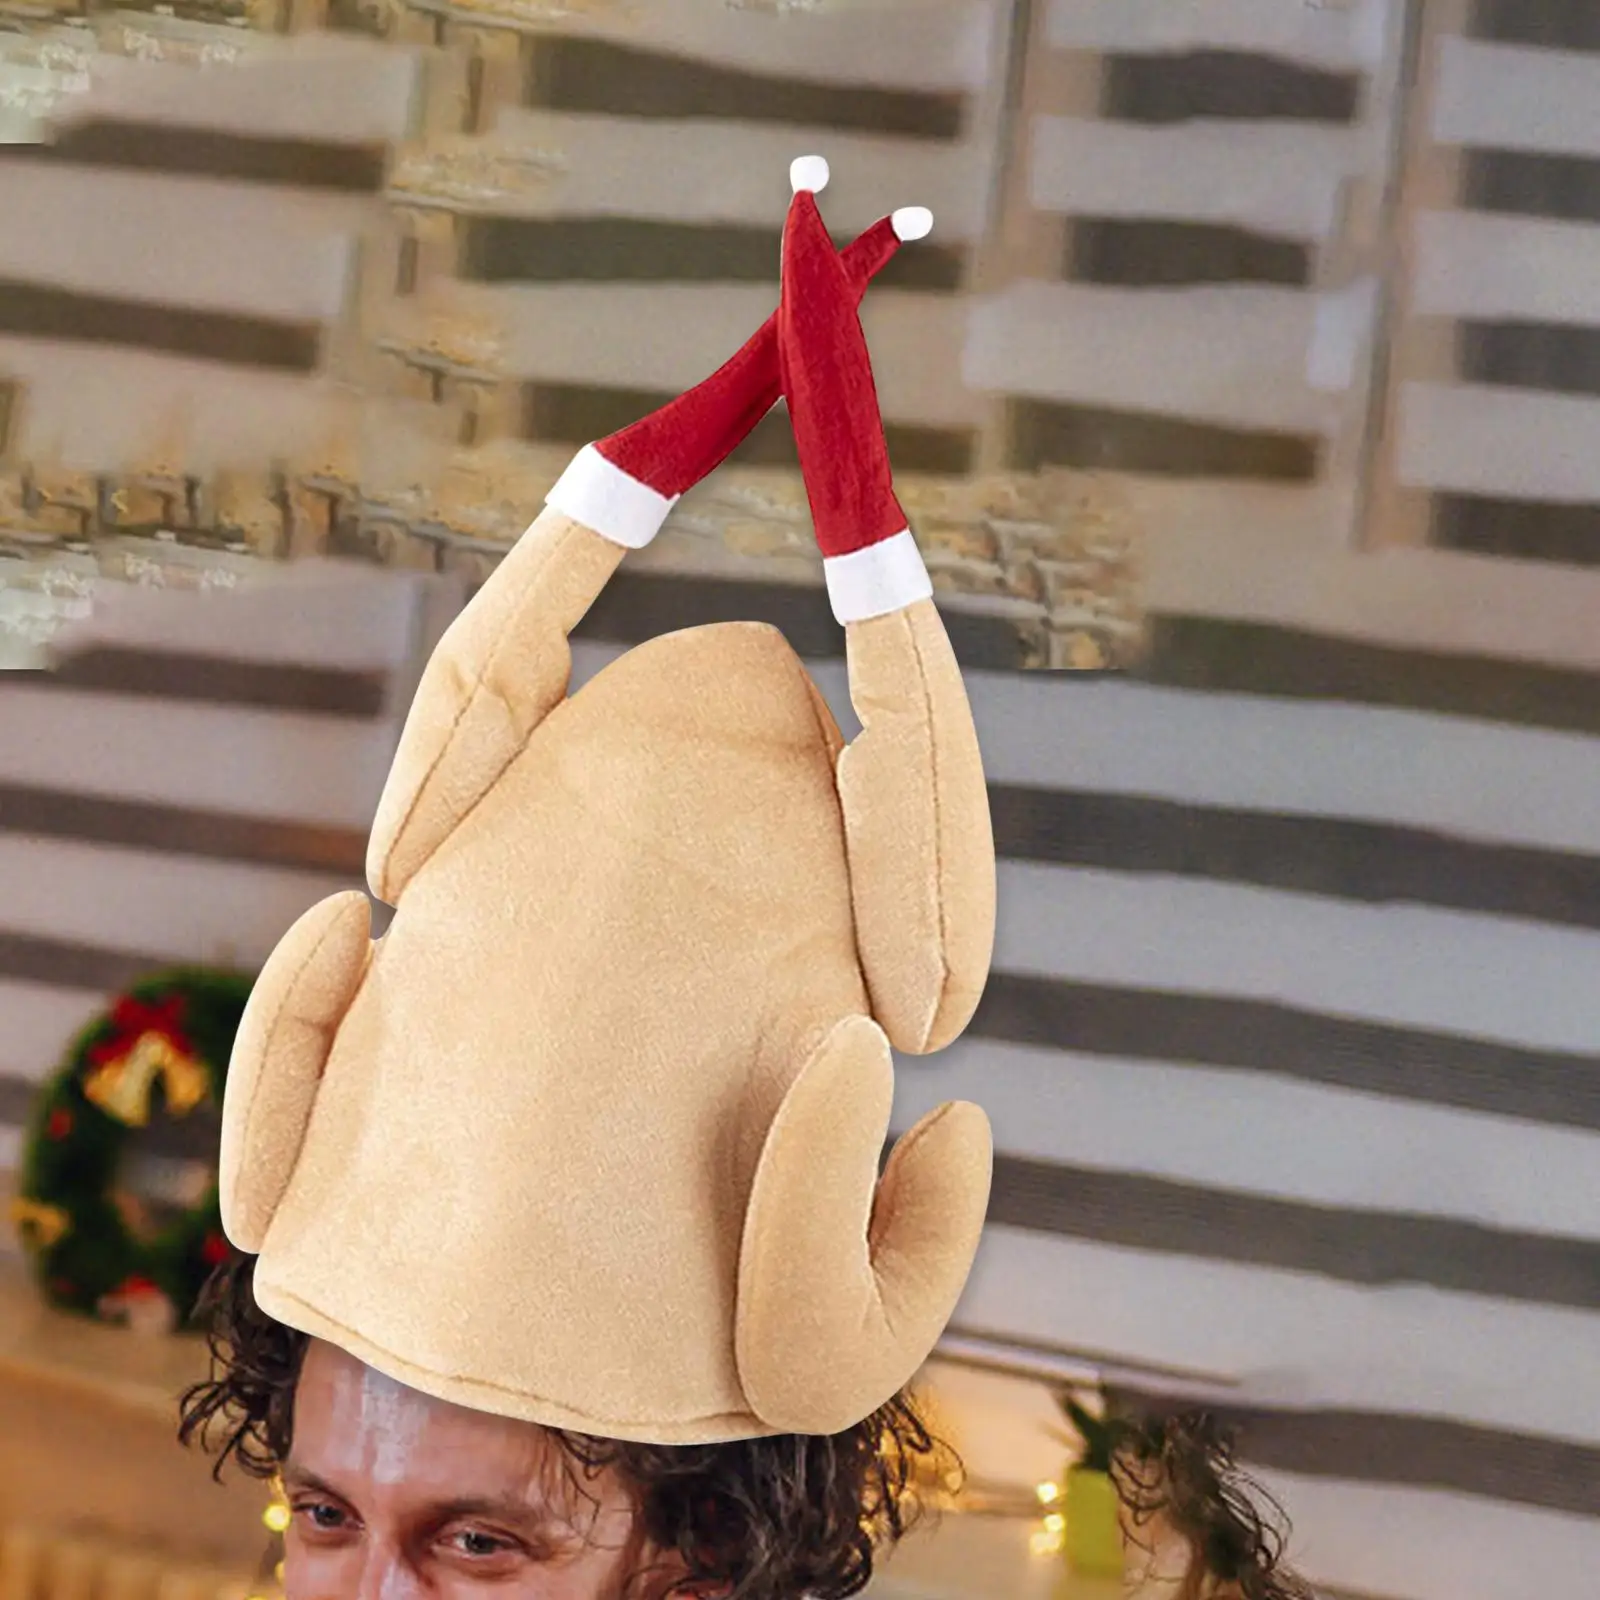 Roasted Turkey Hat Novelty Costumes Accessories Halloween Costume Dress up for Holiday Halloween Party Dress up Adult Kids